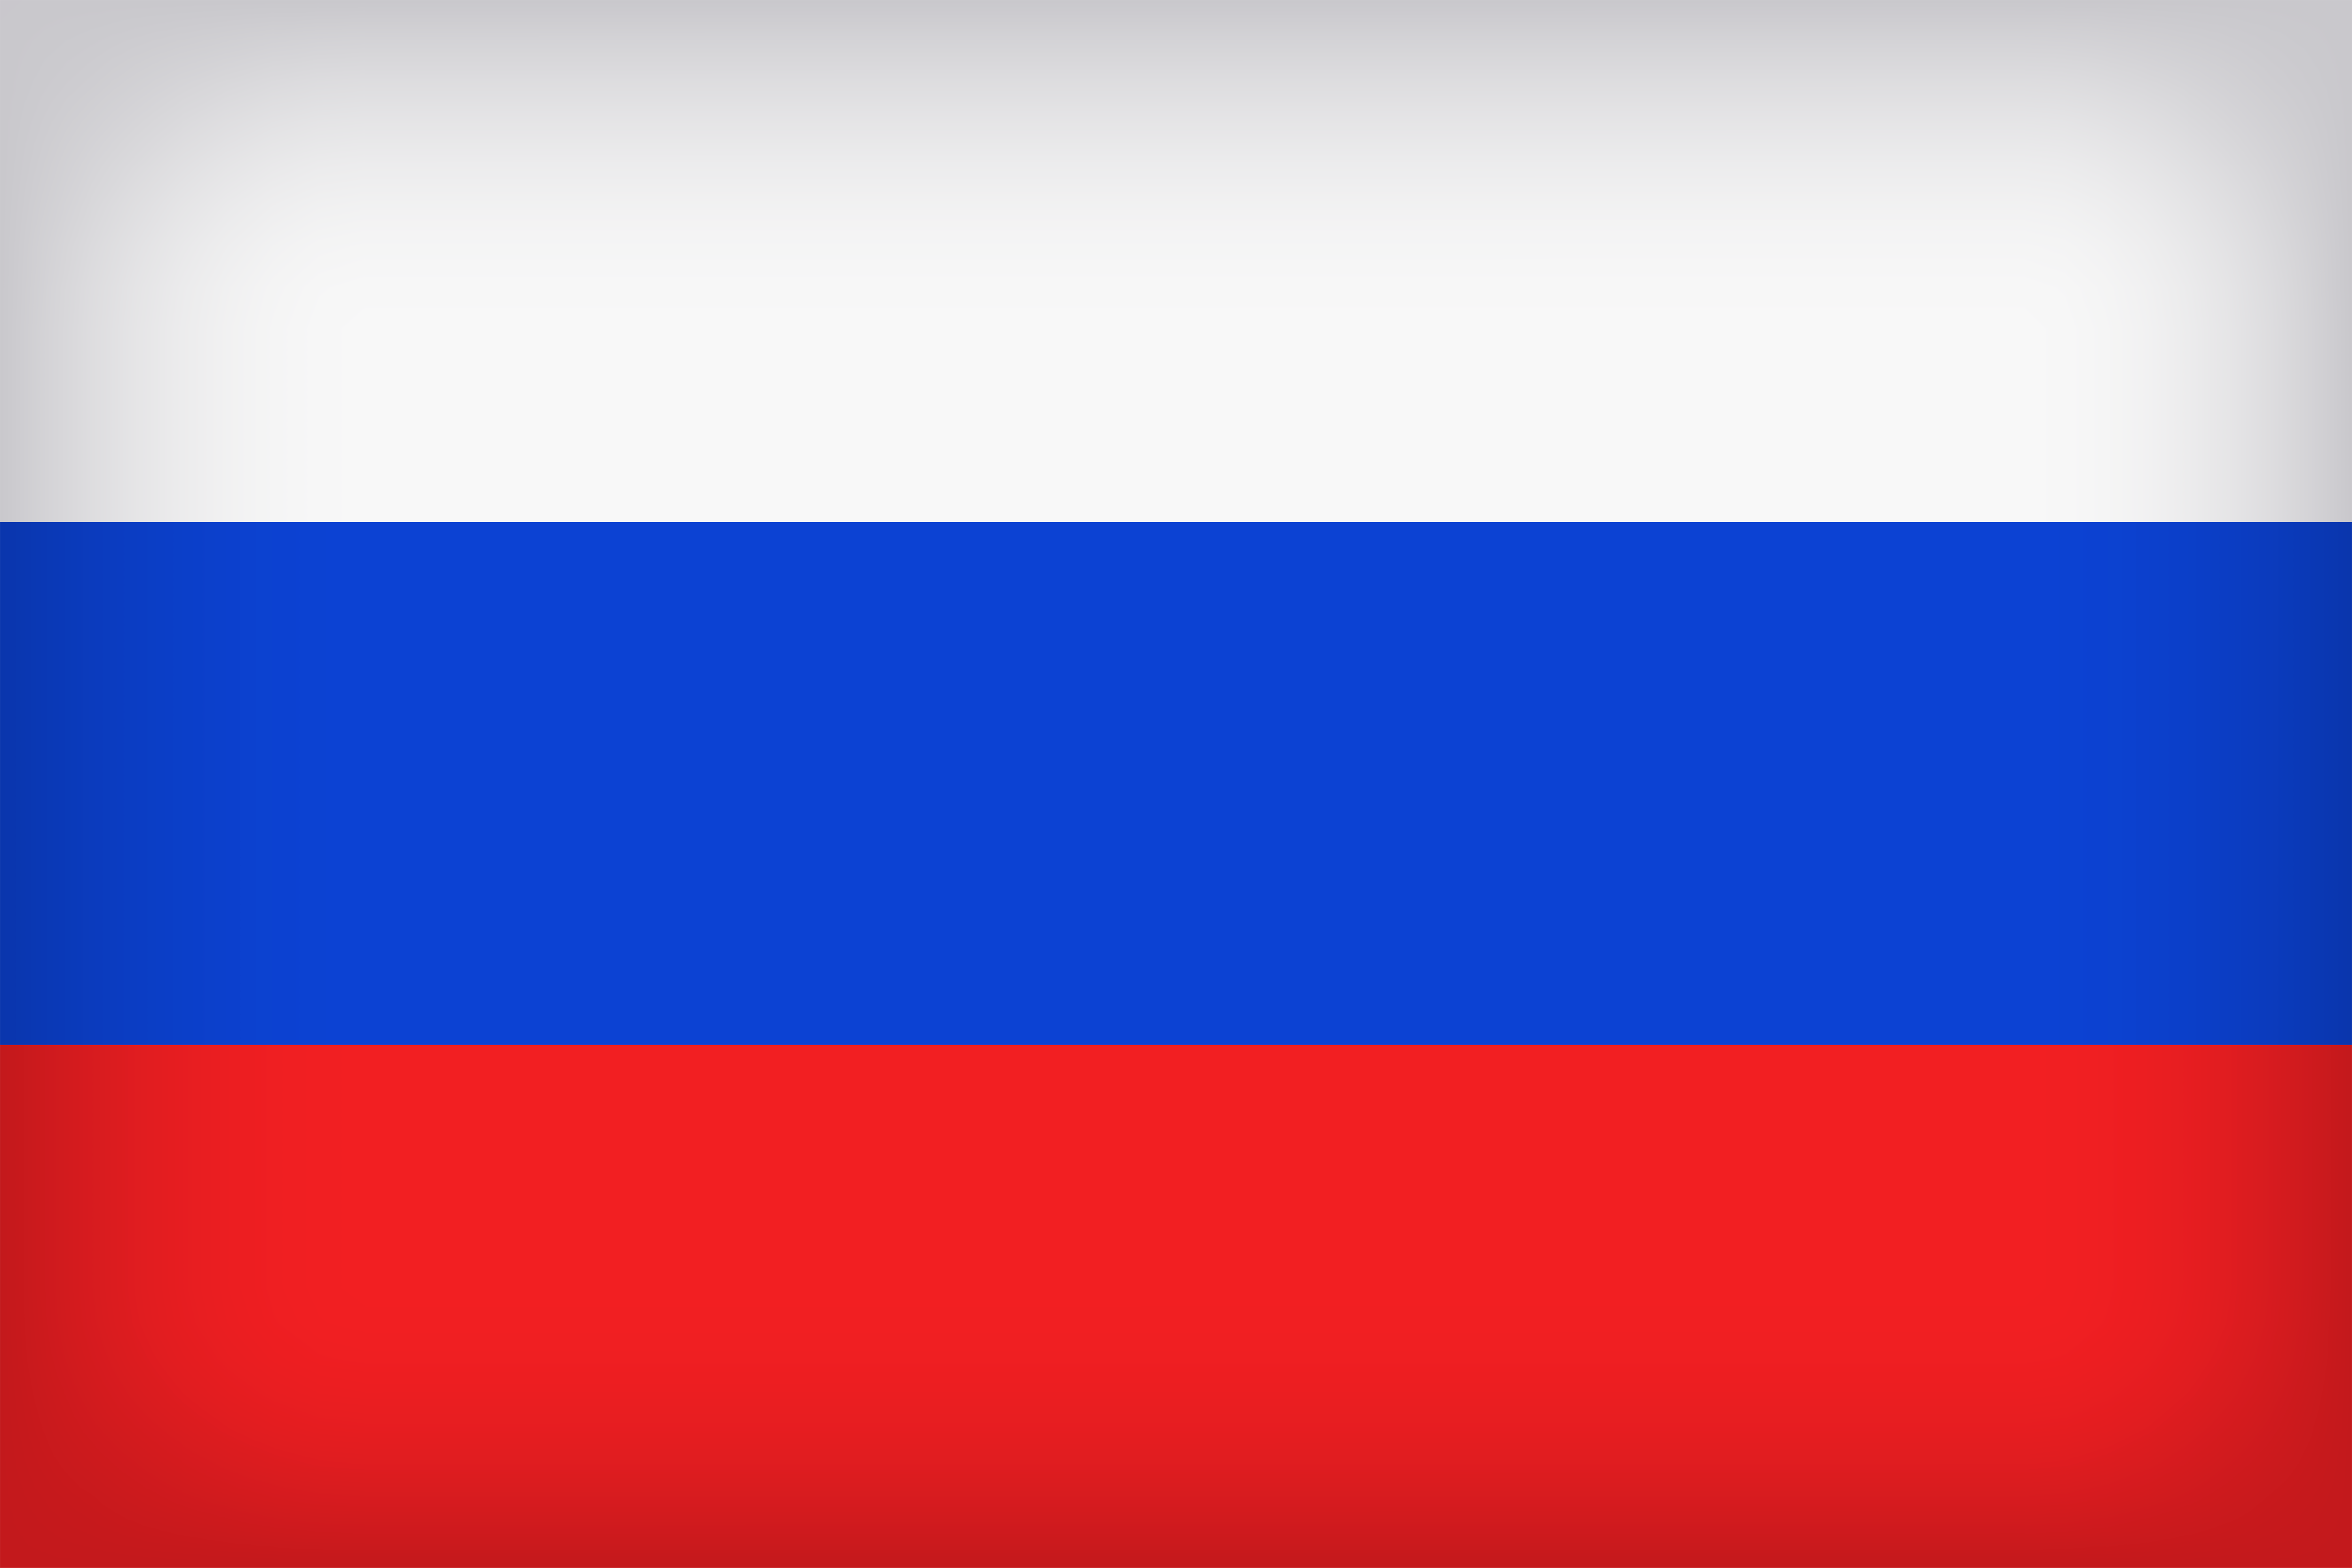 Flag Russia Archives - SimilarPNG